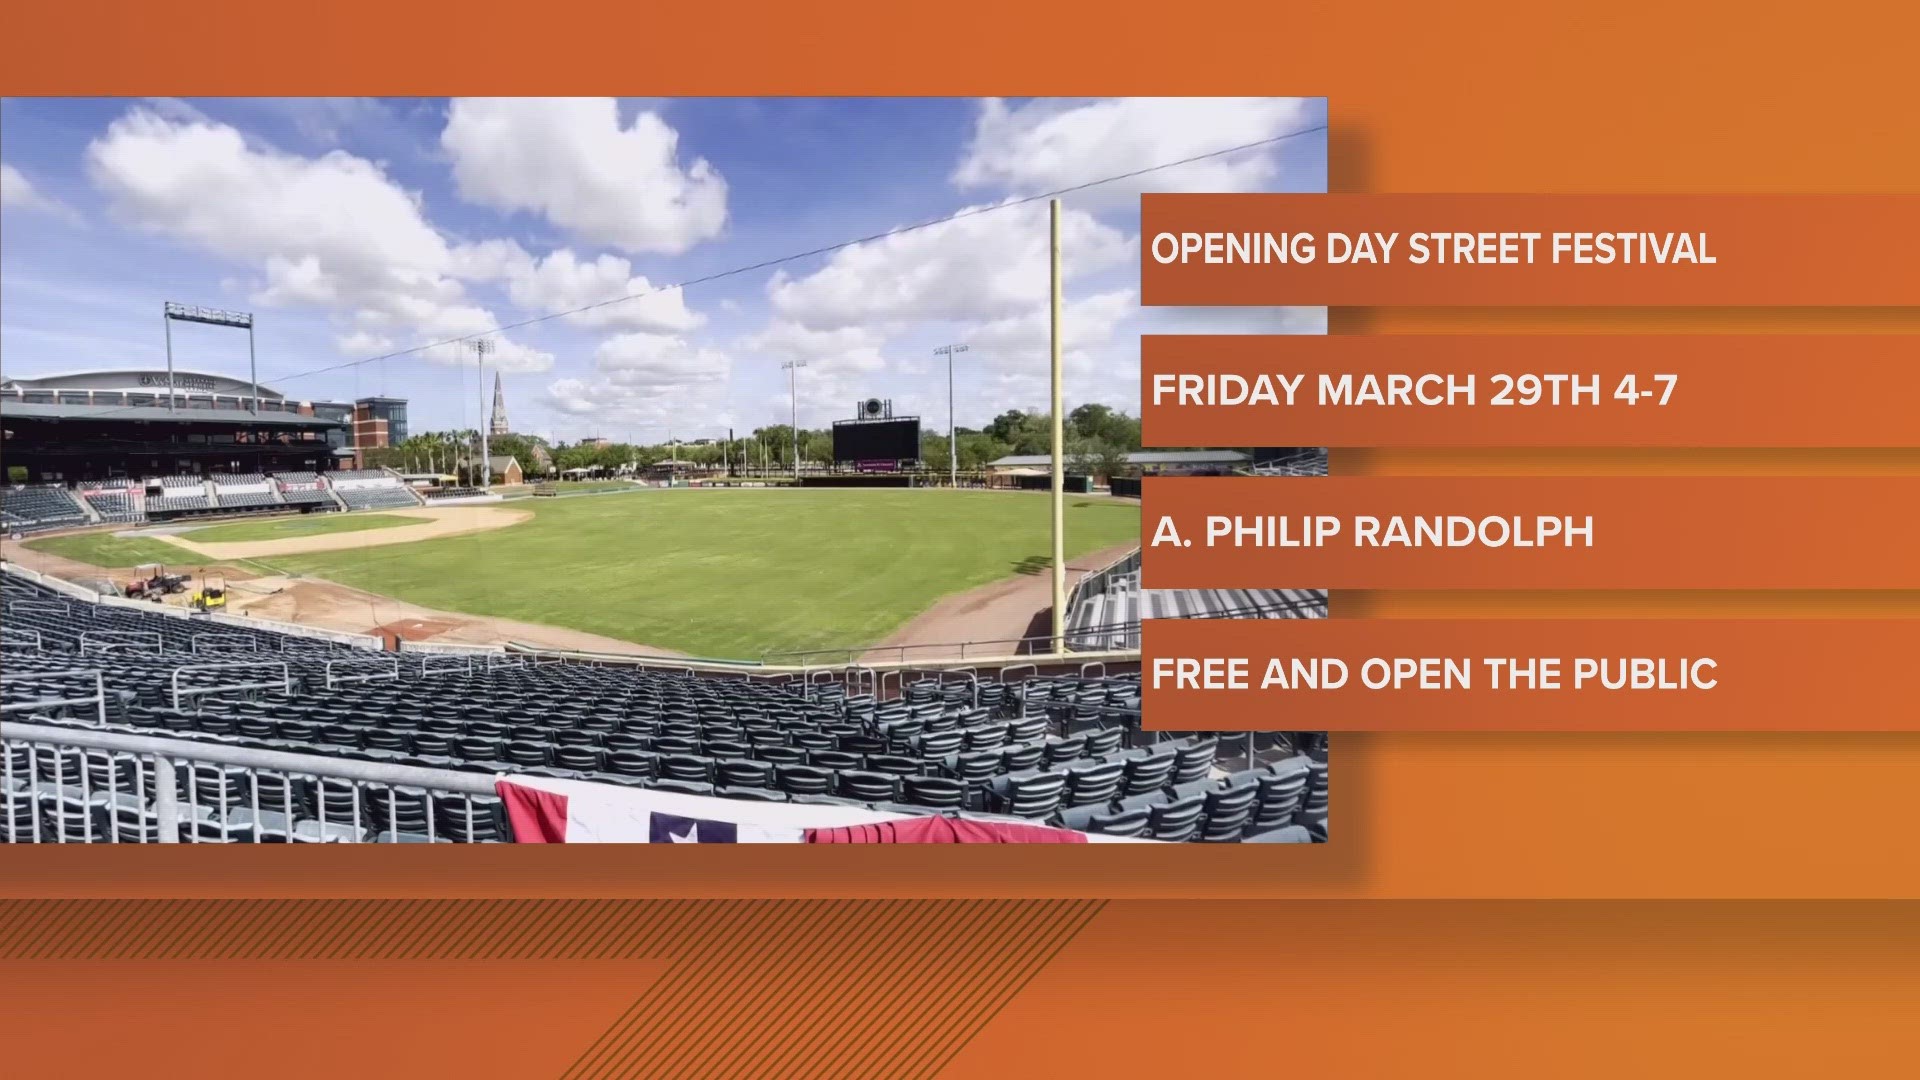 Vendor booths, DJs and more will be featured at the Jumbo Shrimp's Opening Day Festival on March 29; it will take place along A. Philip Randolph Boulevard.